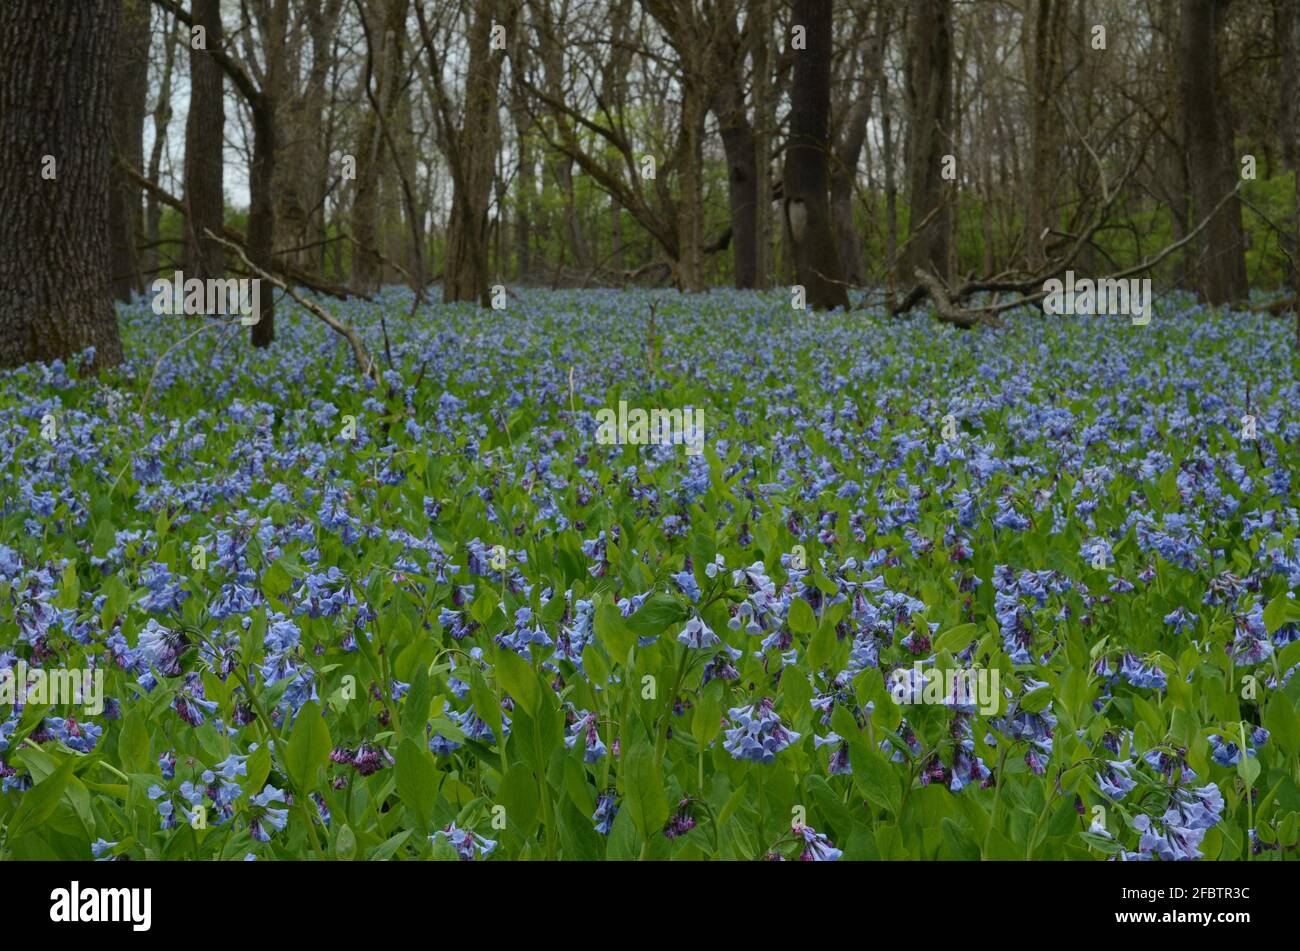 Blanket of Virginia Cowslip in a forest Stock Photo